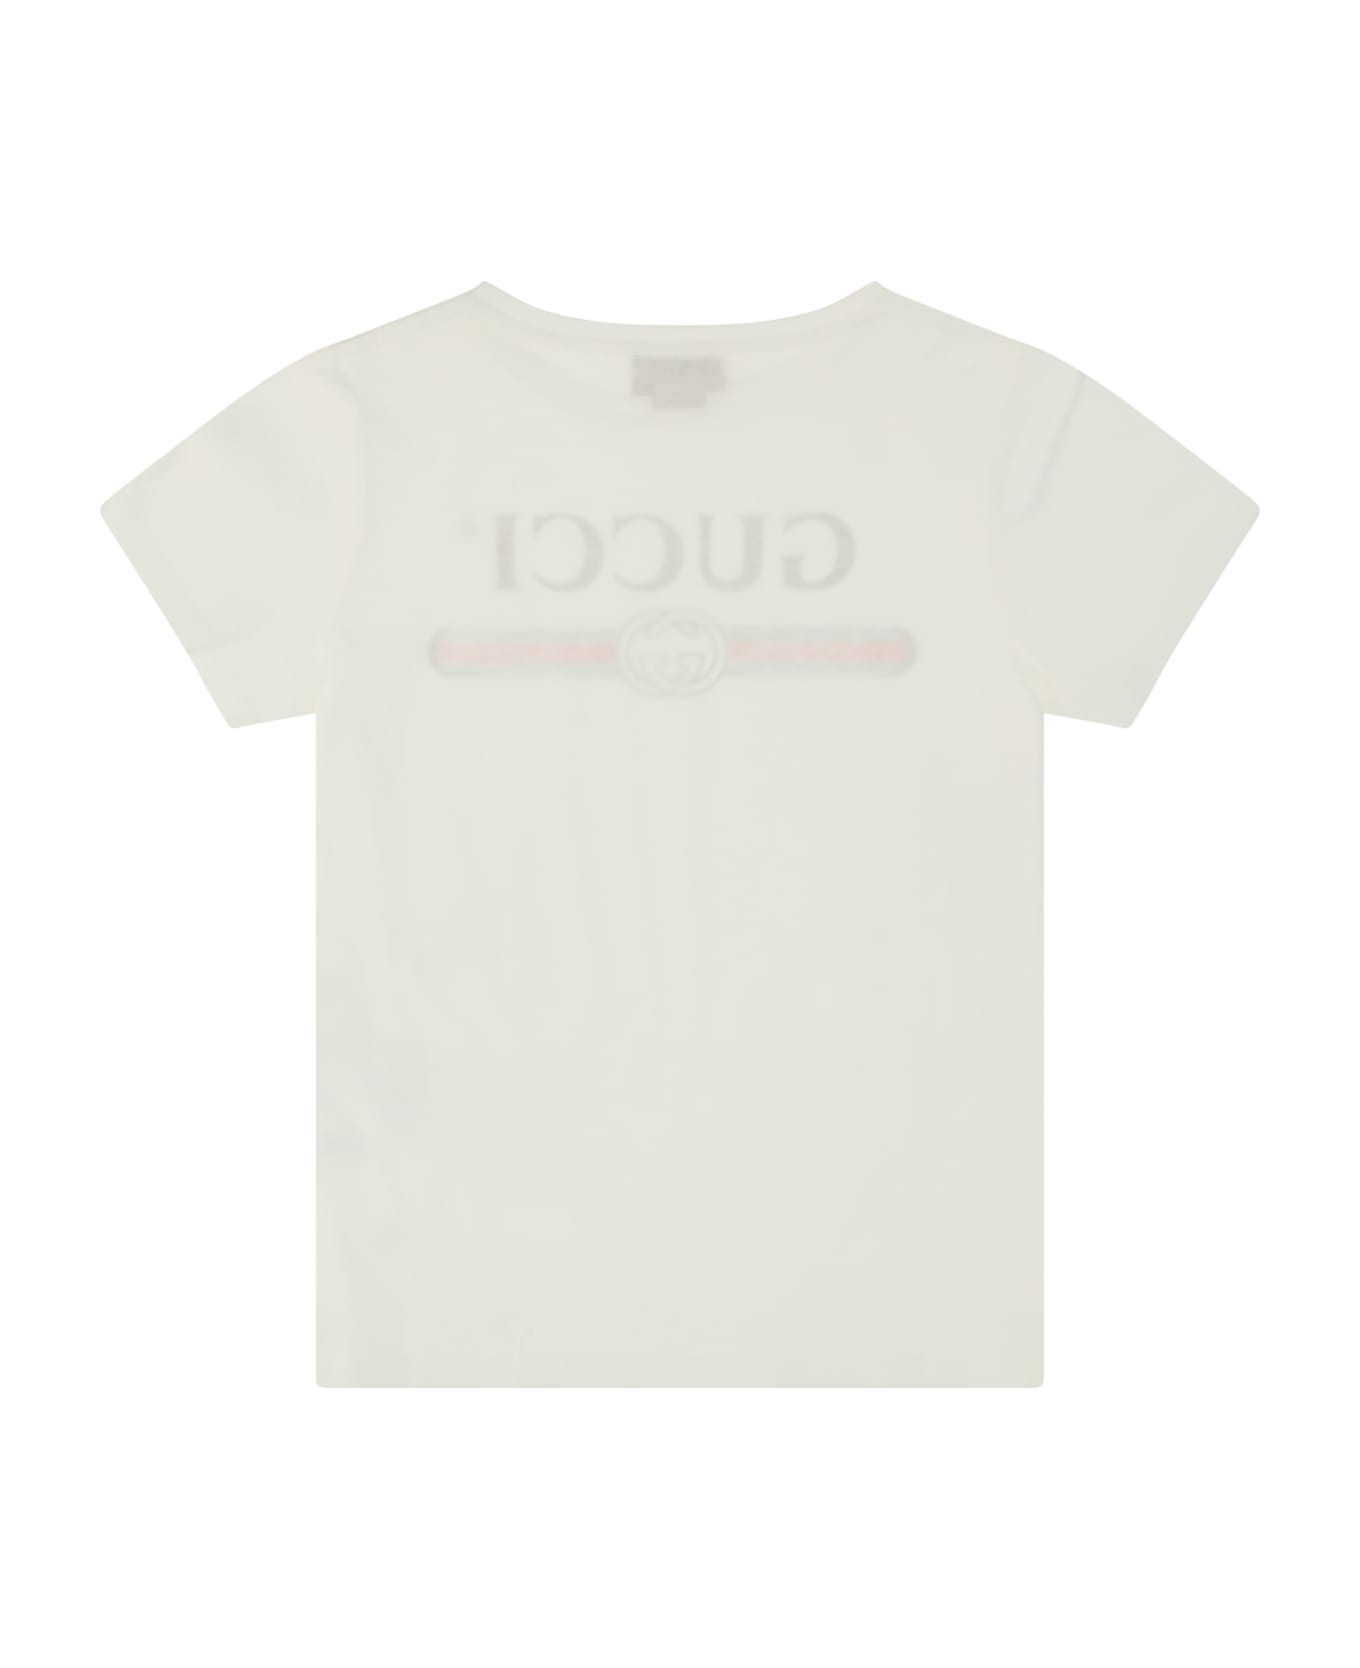 Gucci T-shirt For Boy - White トップス